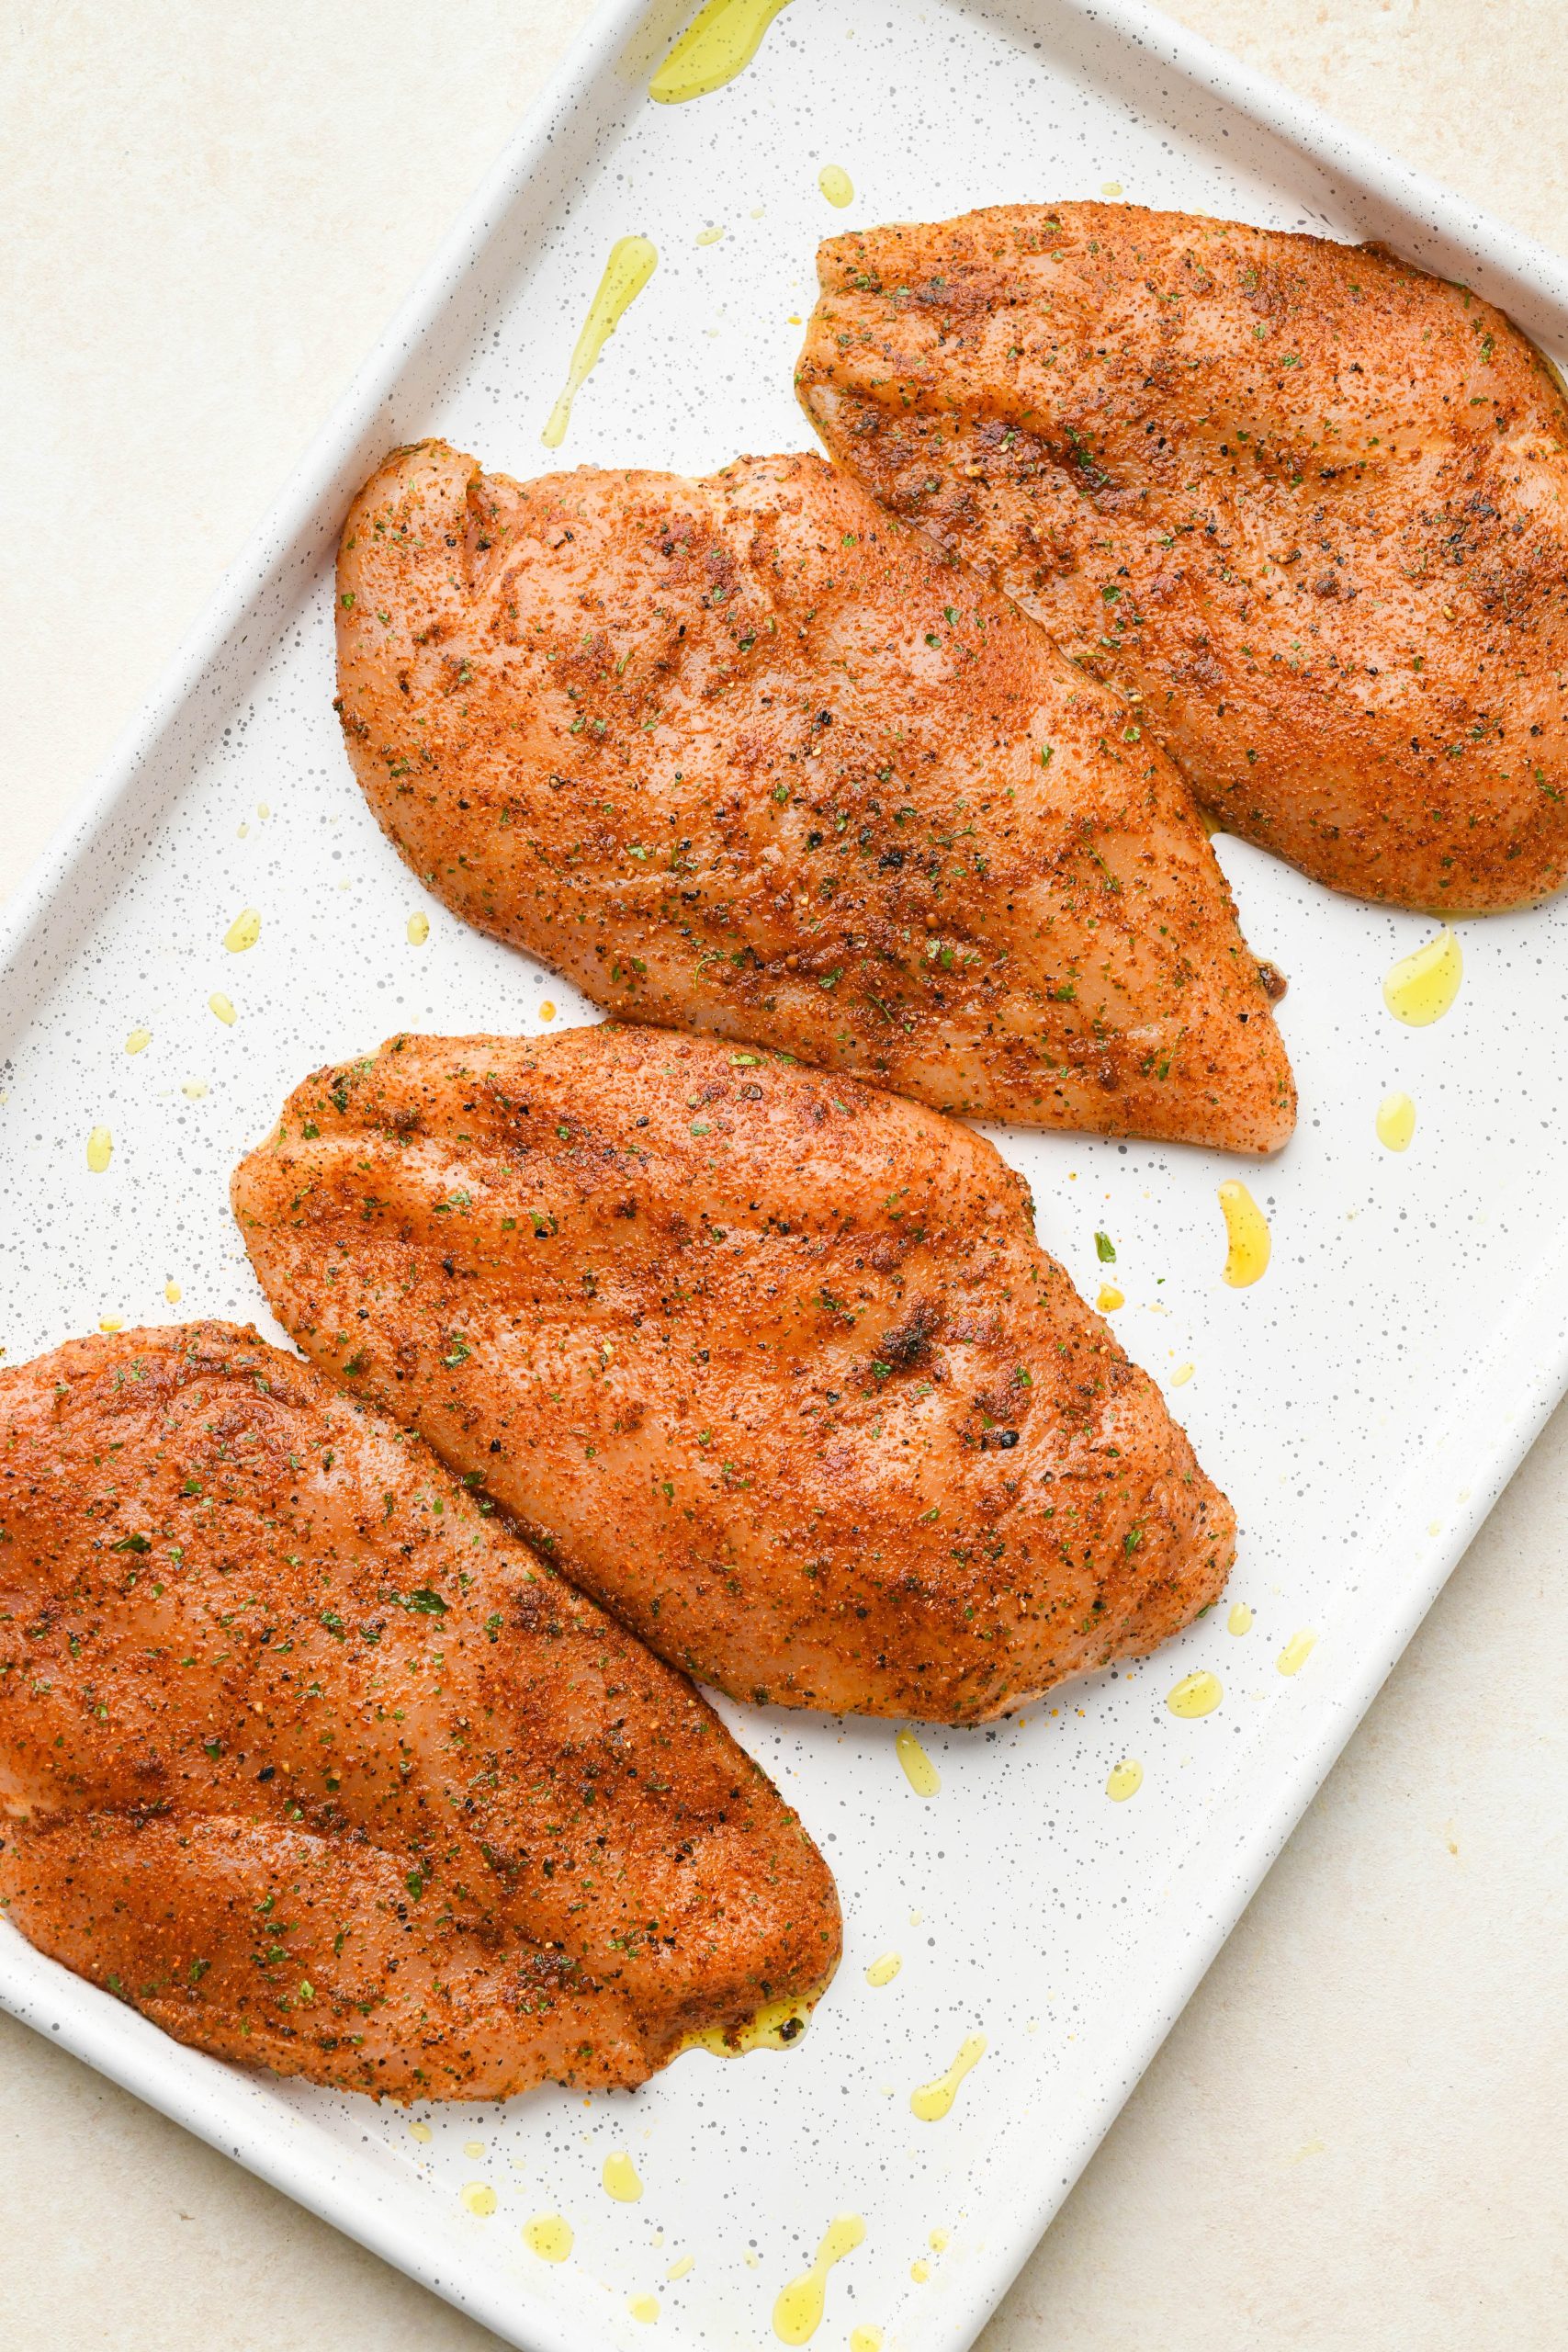 How to make baked chicken breast: Raw spice coated chicken breasts evenly spaced out on a large rimmed baking sheet.